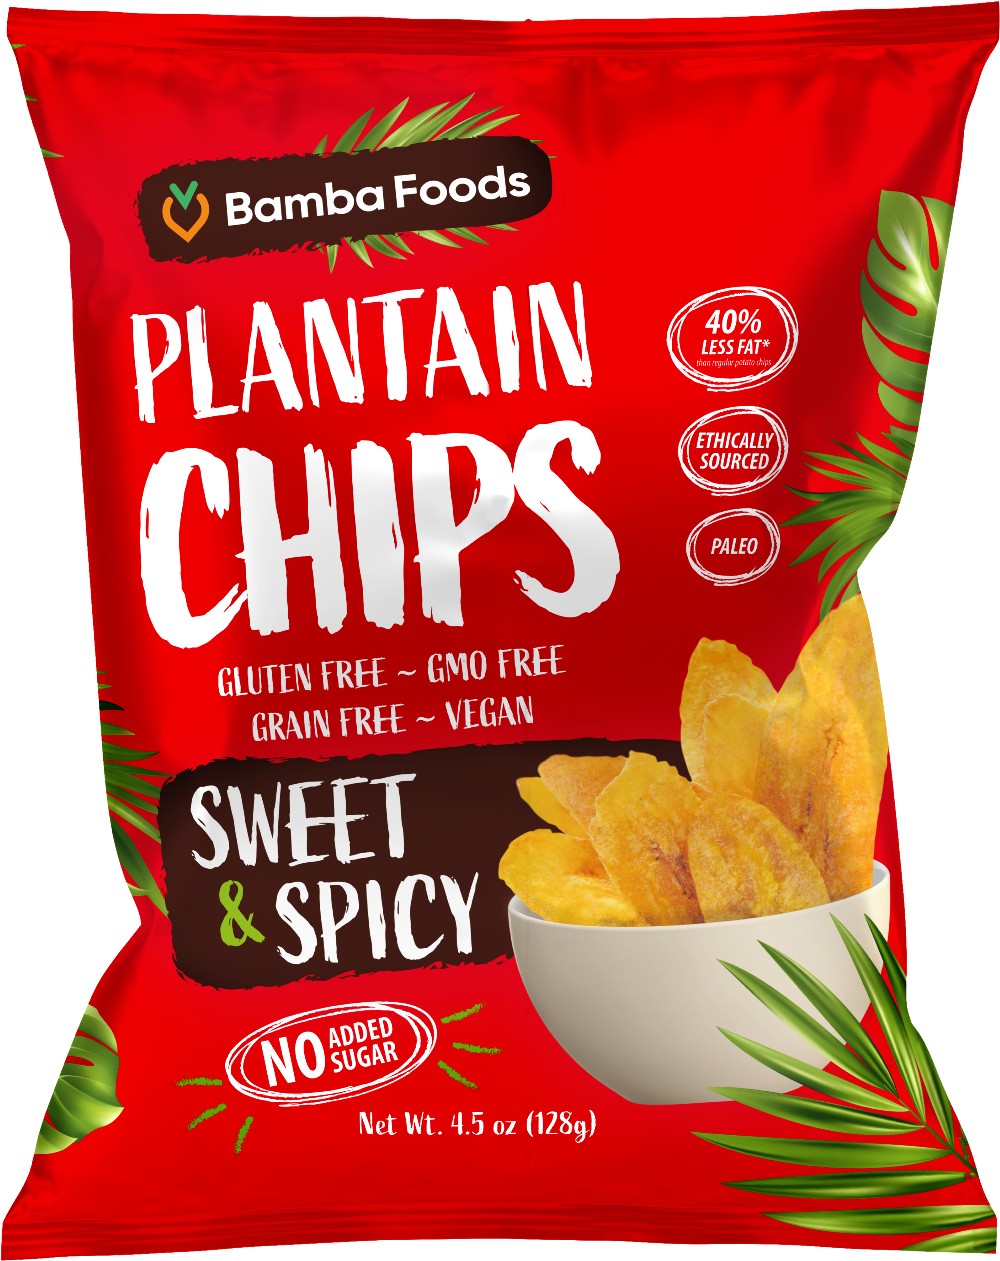 Bamba Foods Has the Best Selection of Healthy and Delicious Snacks